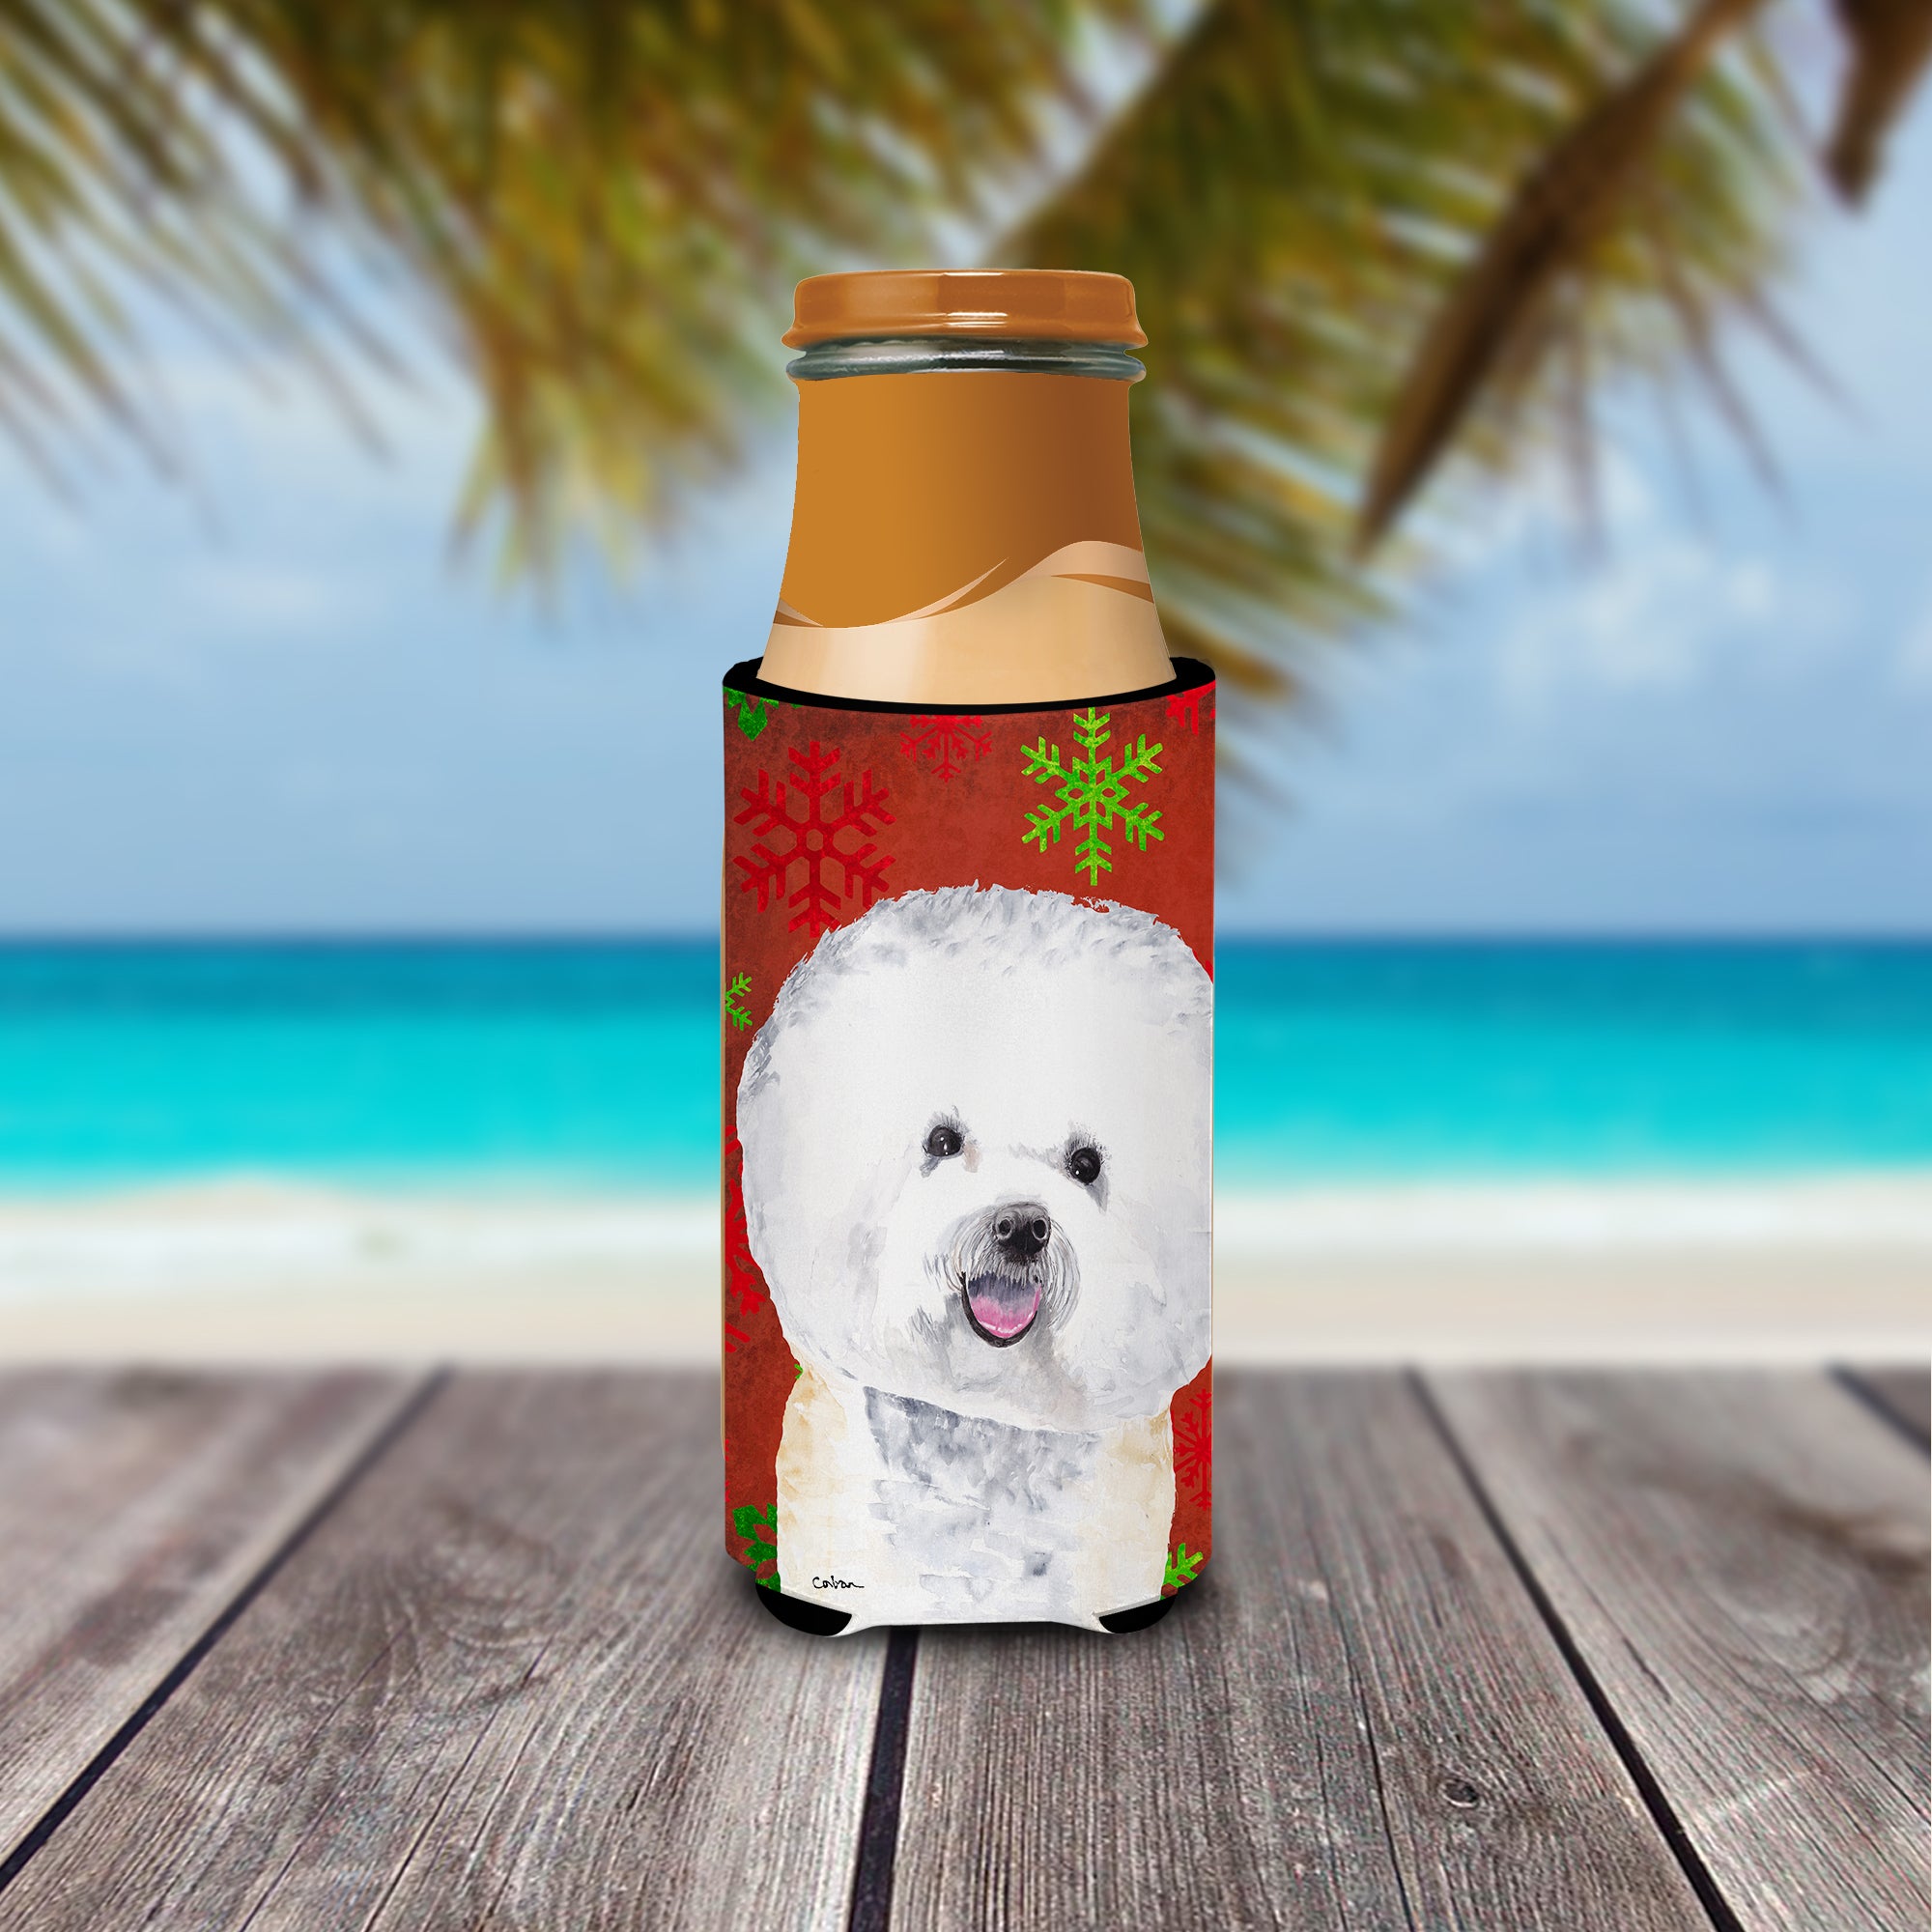 Bichon Frise Red and Green Snowflakes Holiday Christmas Ultra Beverage Insulators for slim cans SC9402MUK.